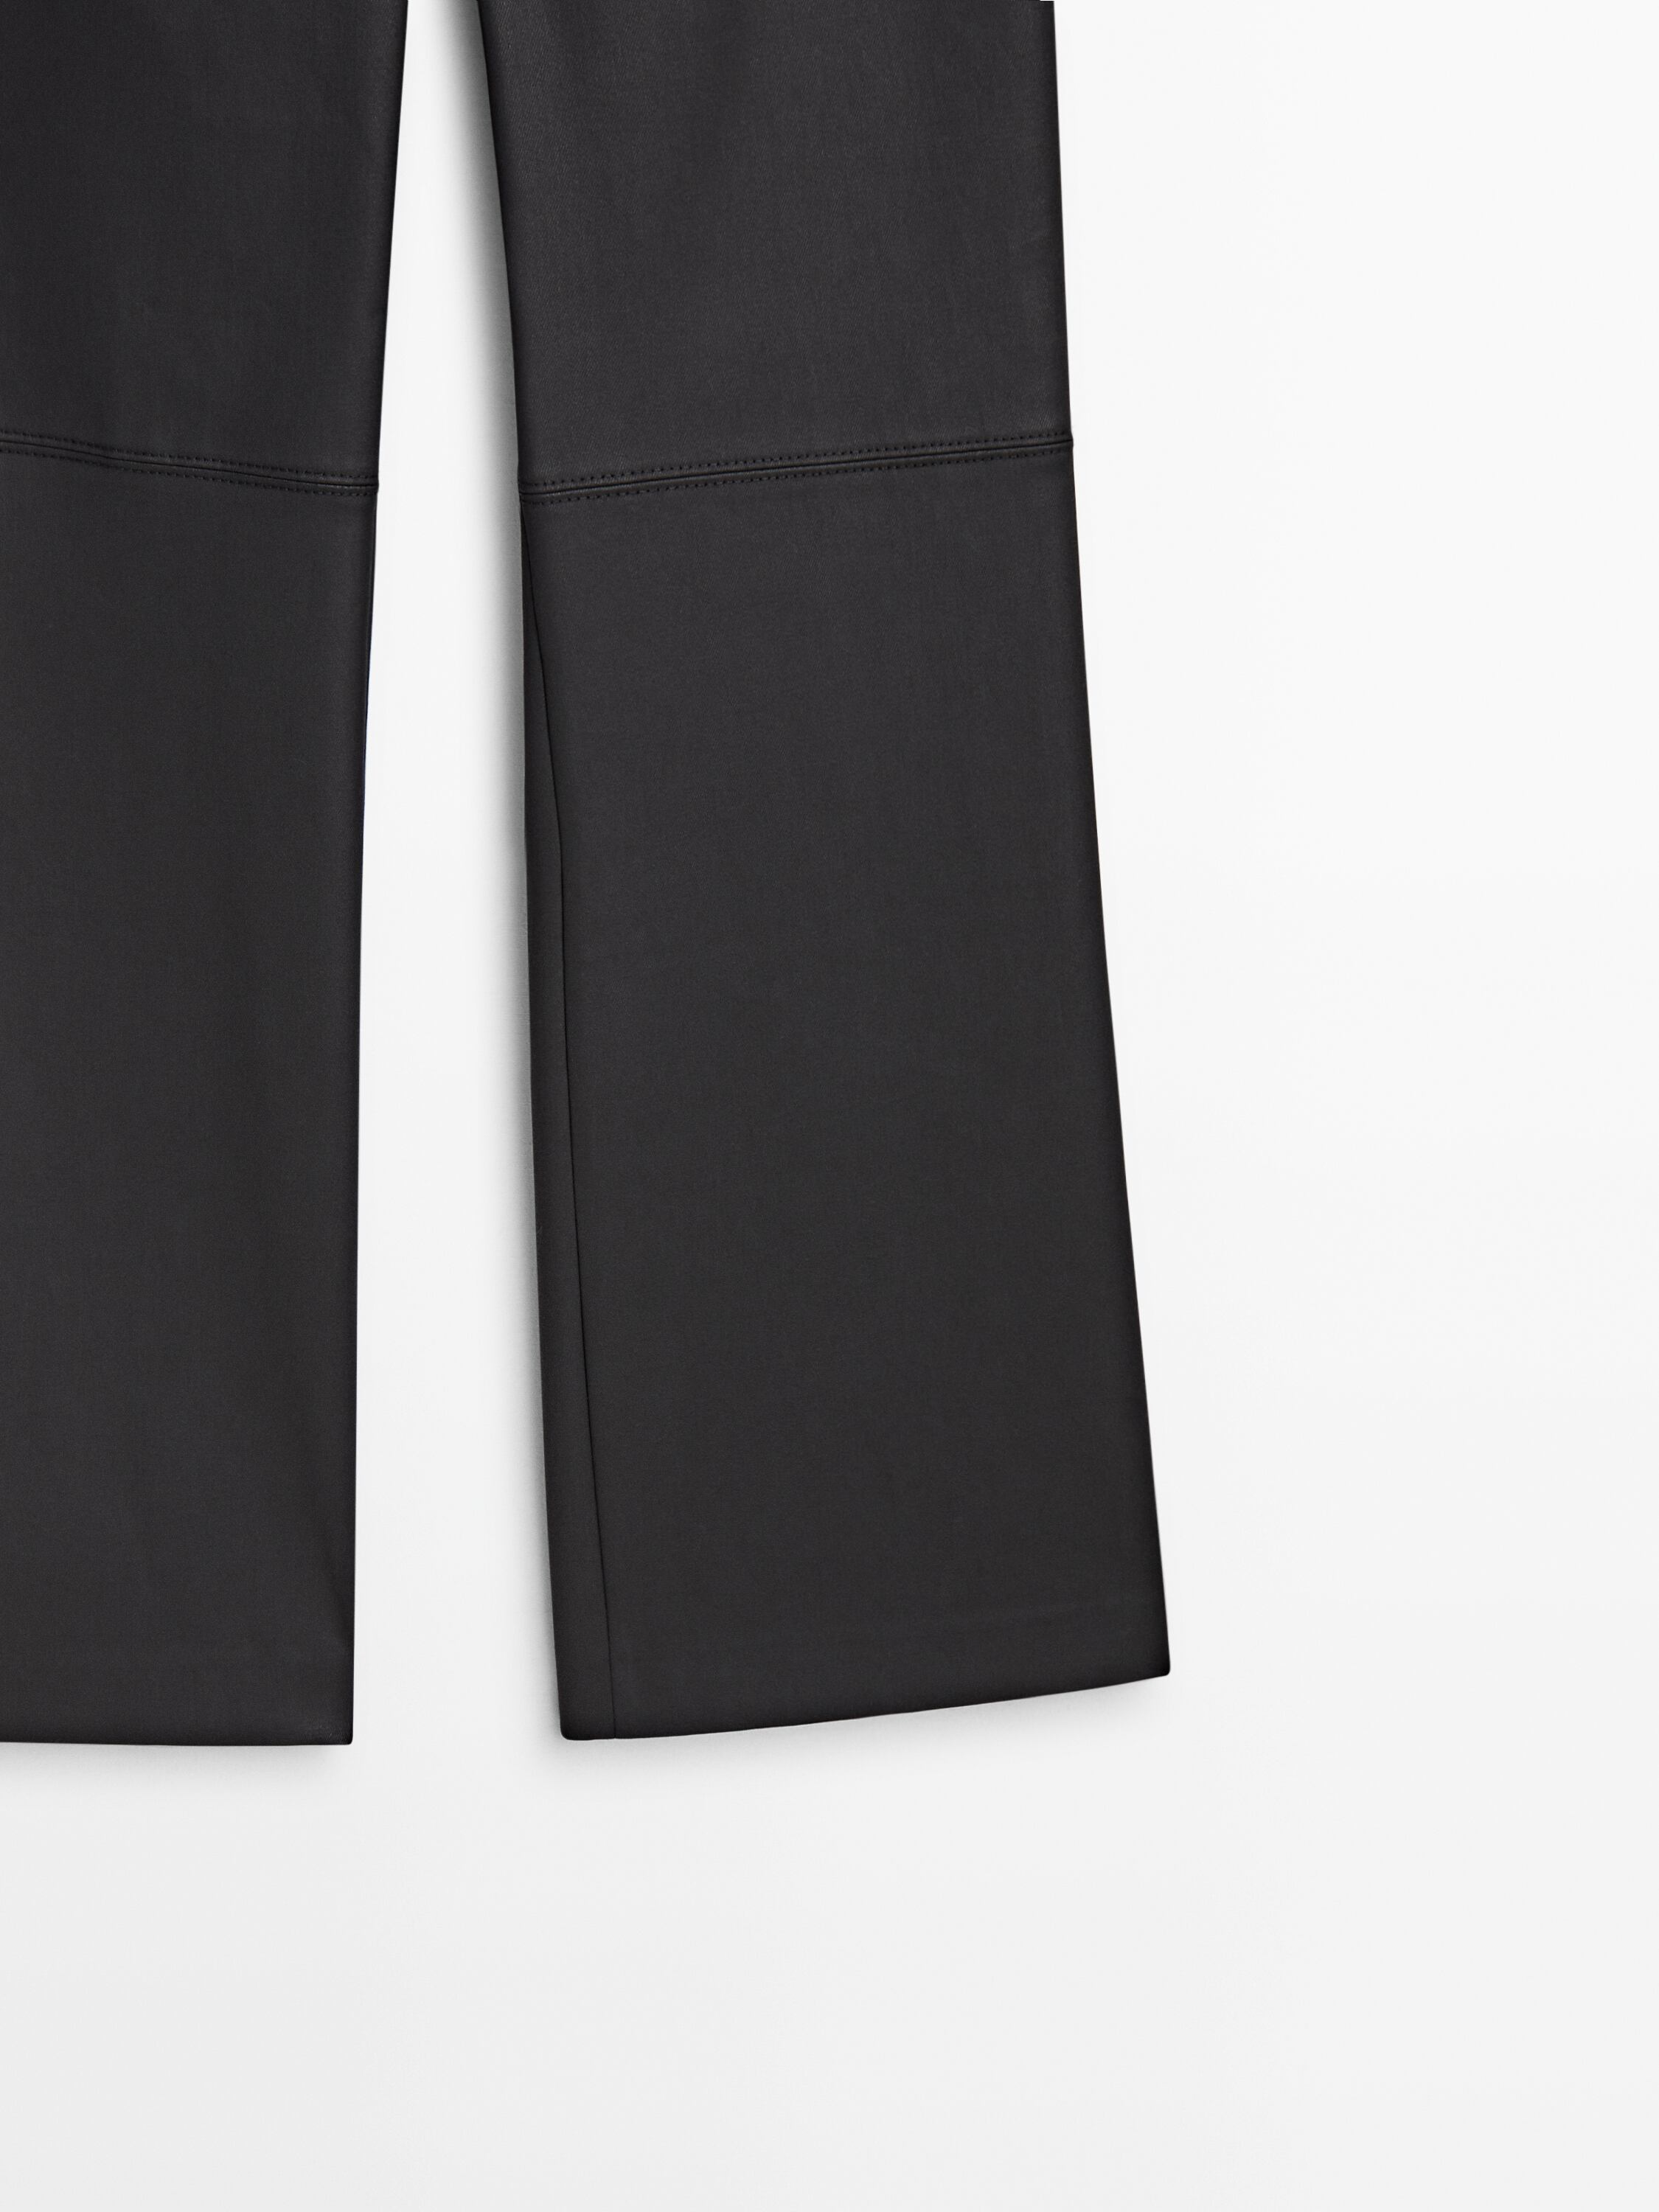 Waxed trousers with seam detail